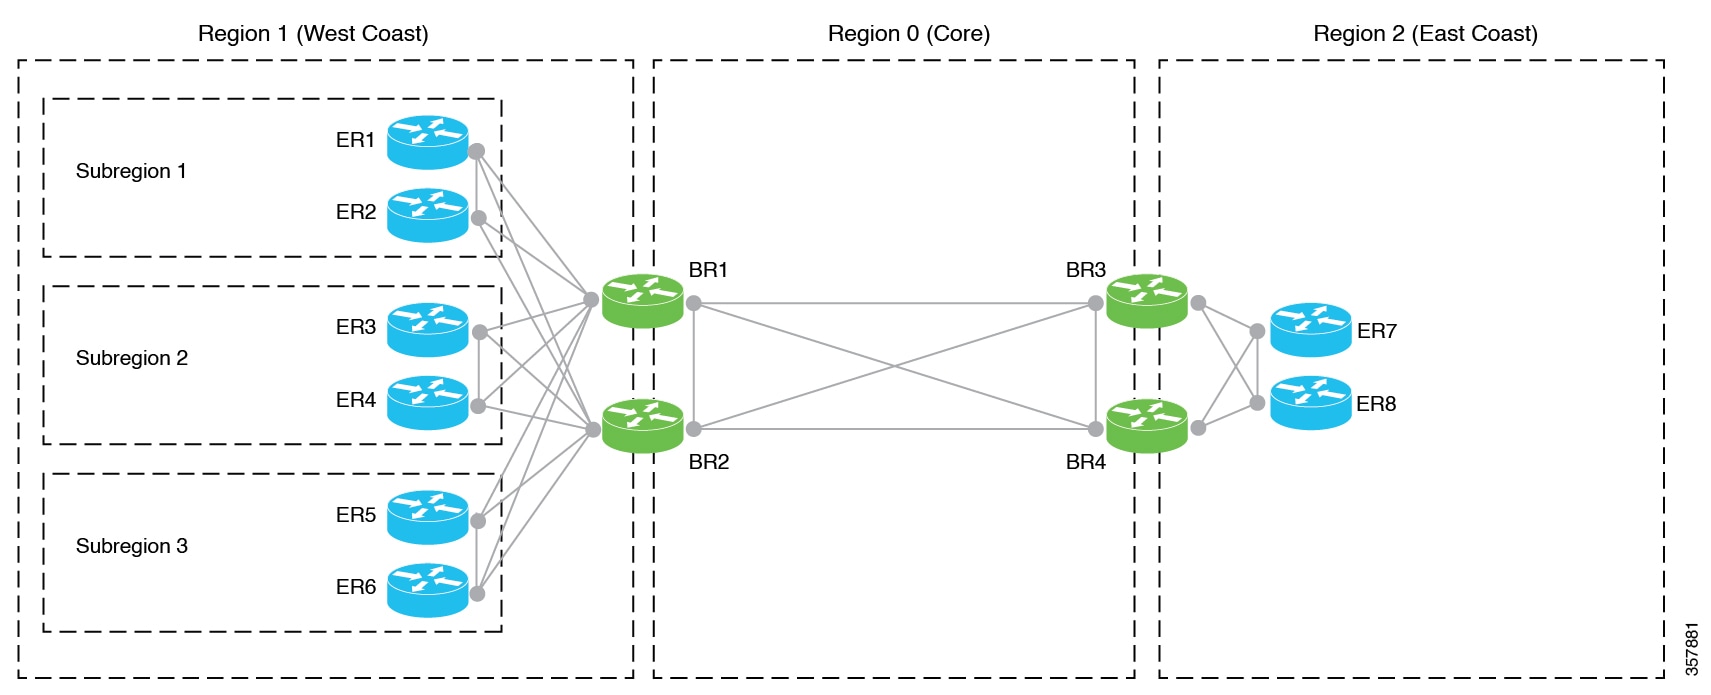 Multi-Region Fabric network with two border routers shared among three subregions of an access region.